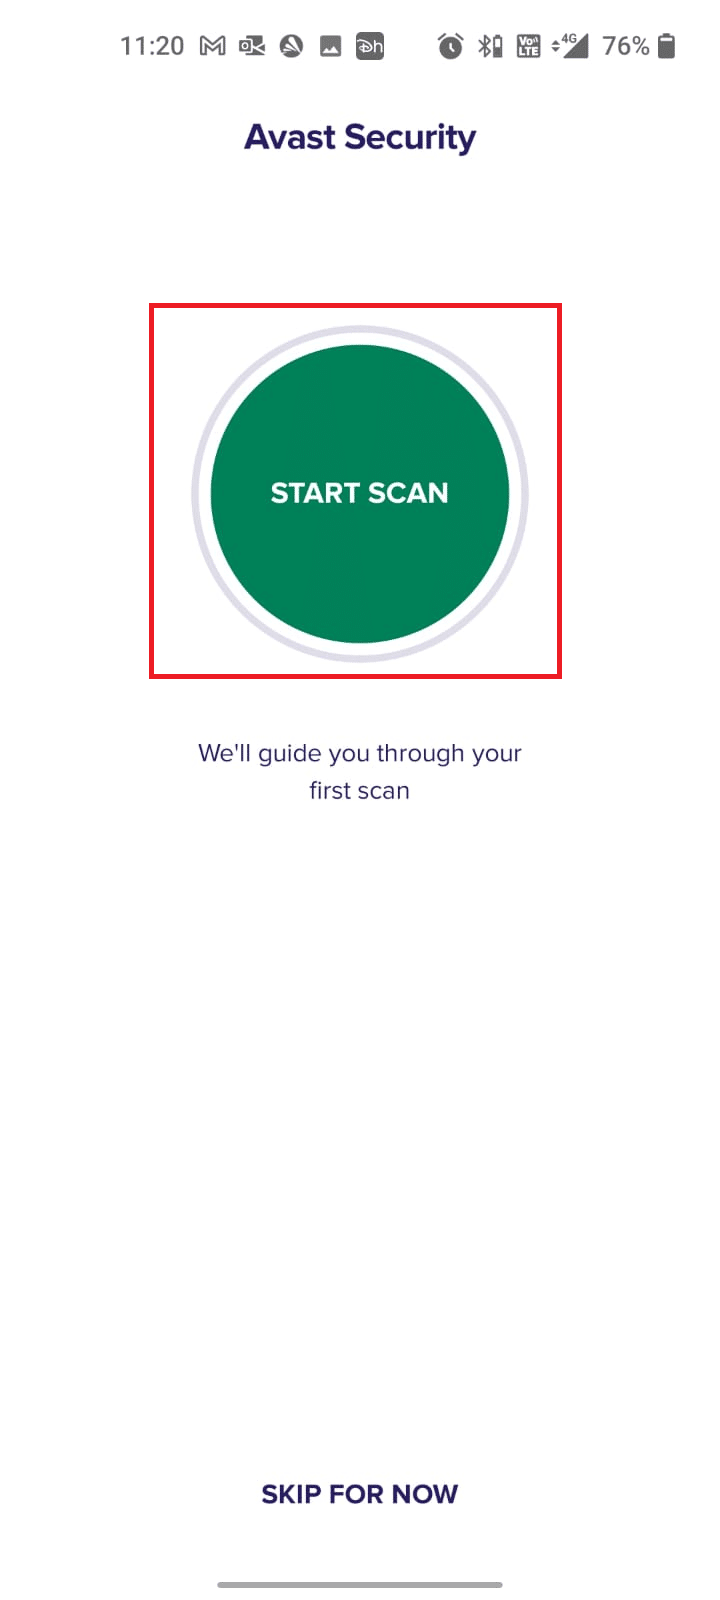 tap START SCAN | Fix Google Play Error Code 495 on Android